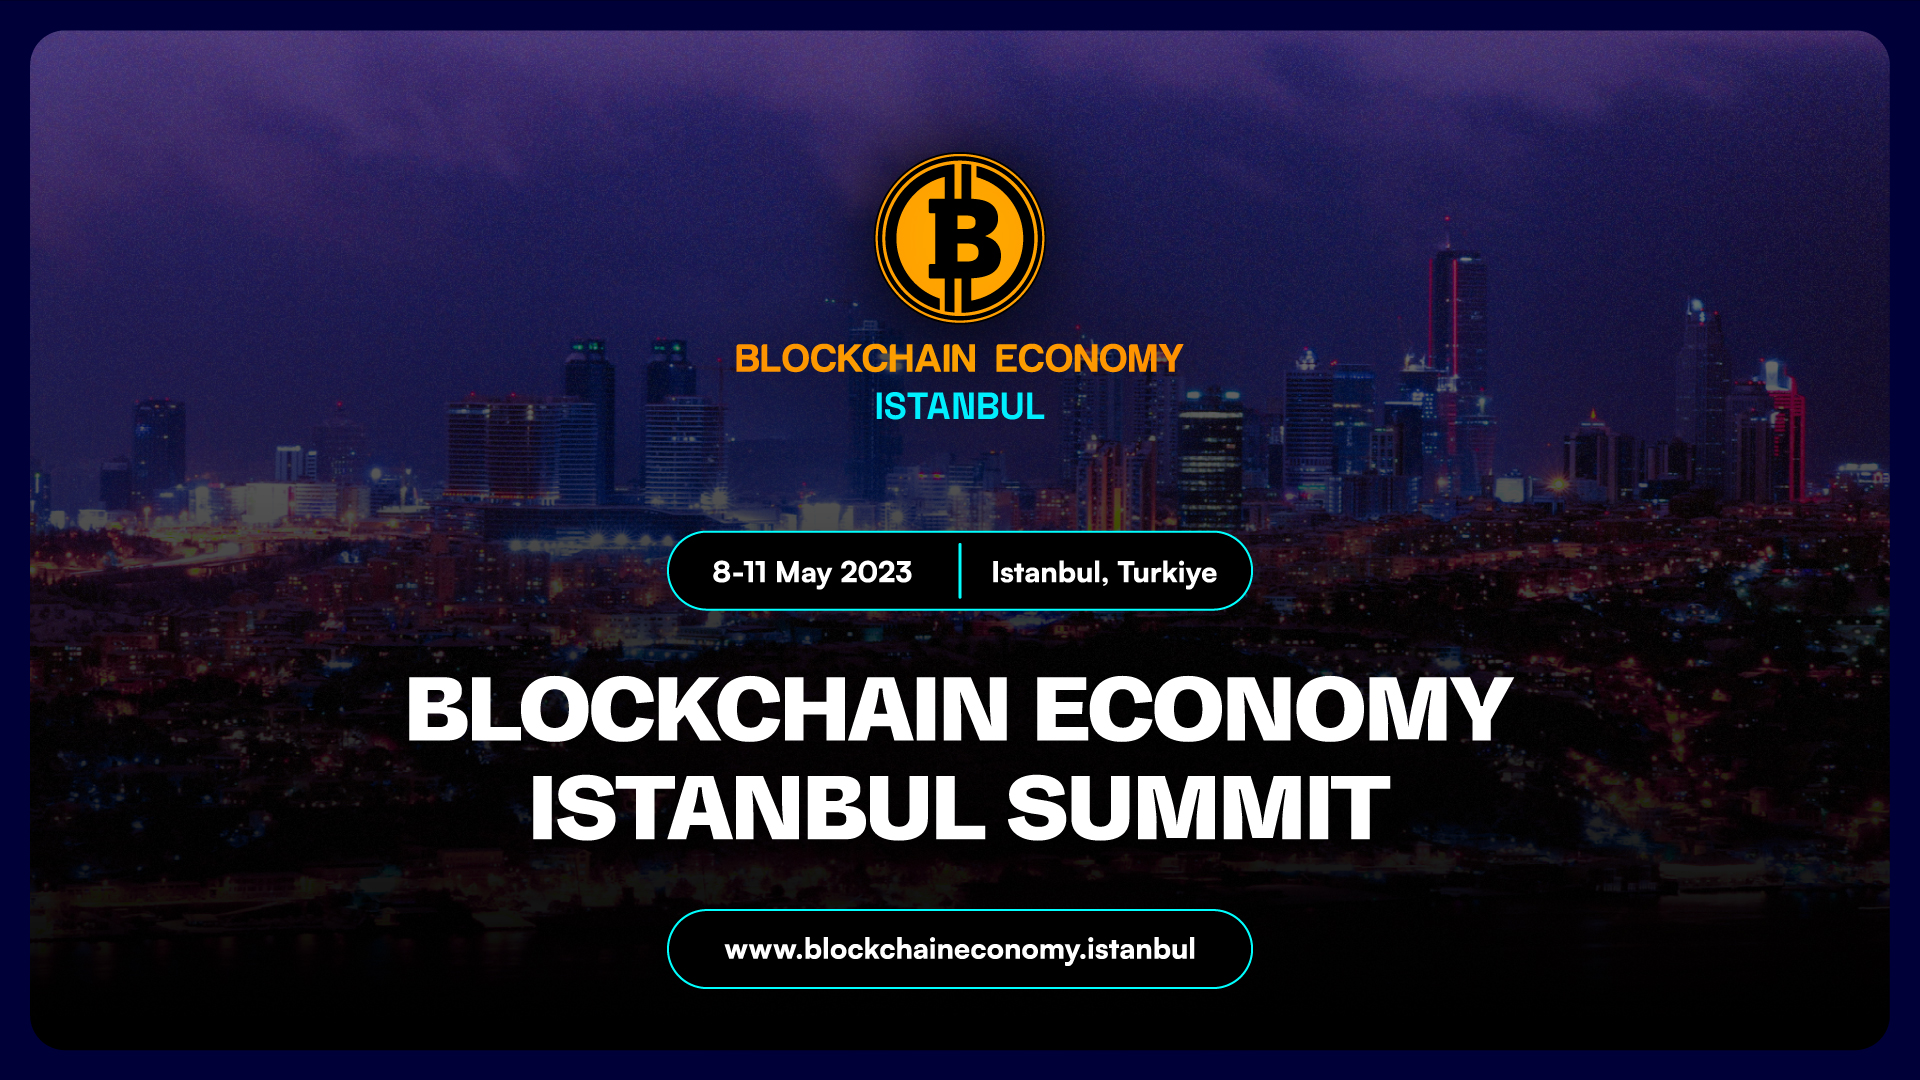 The Blockchain Economy Istanbul Summit as part of Blockchain and Web3 events of 2023